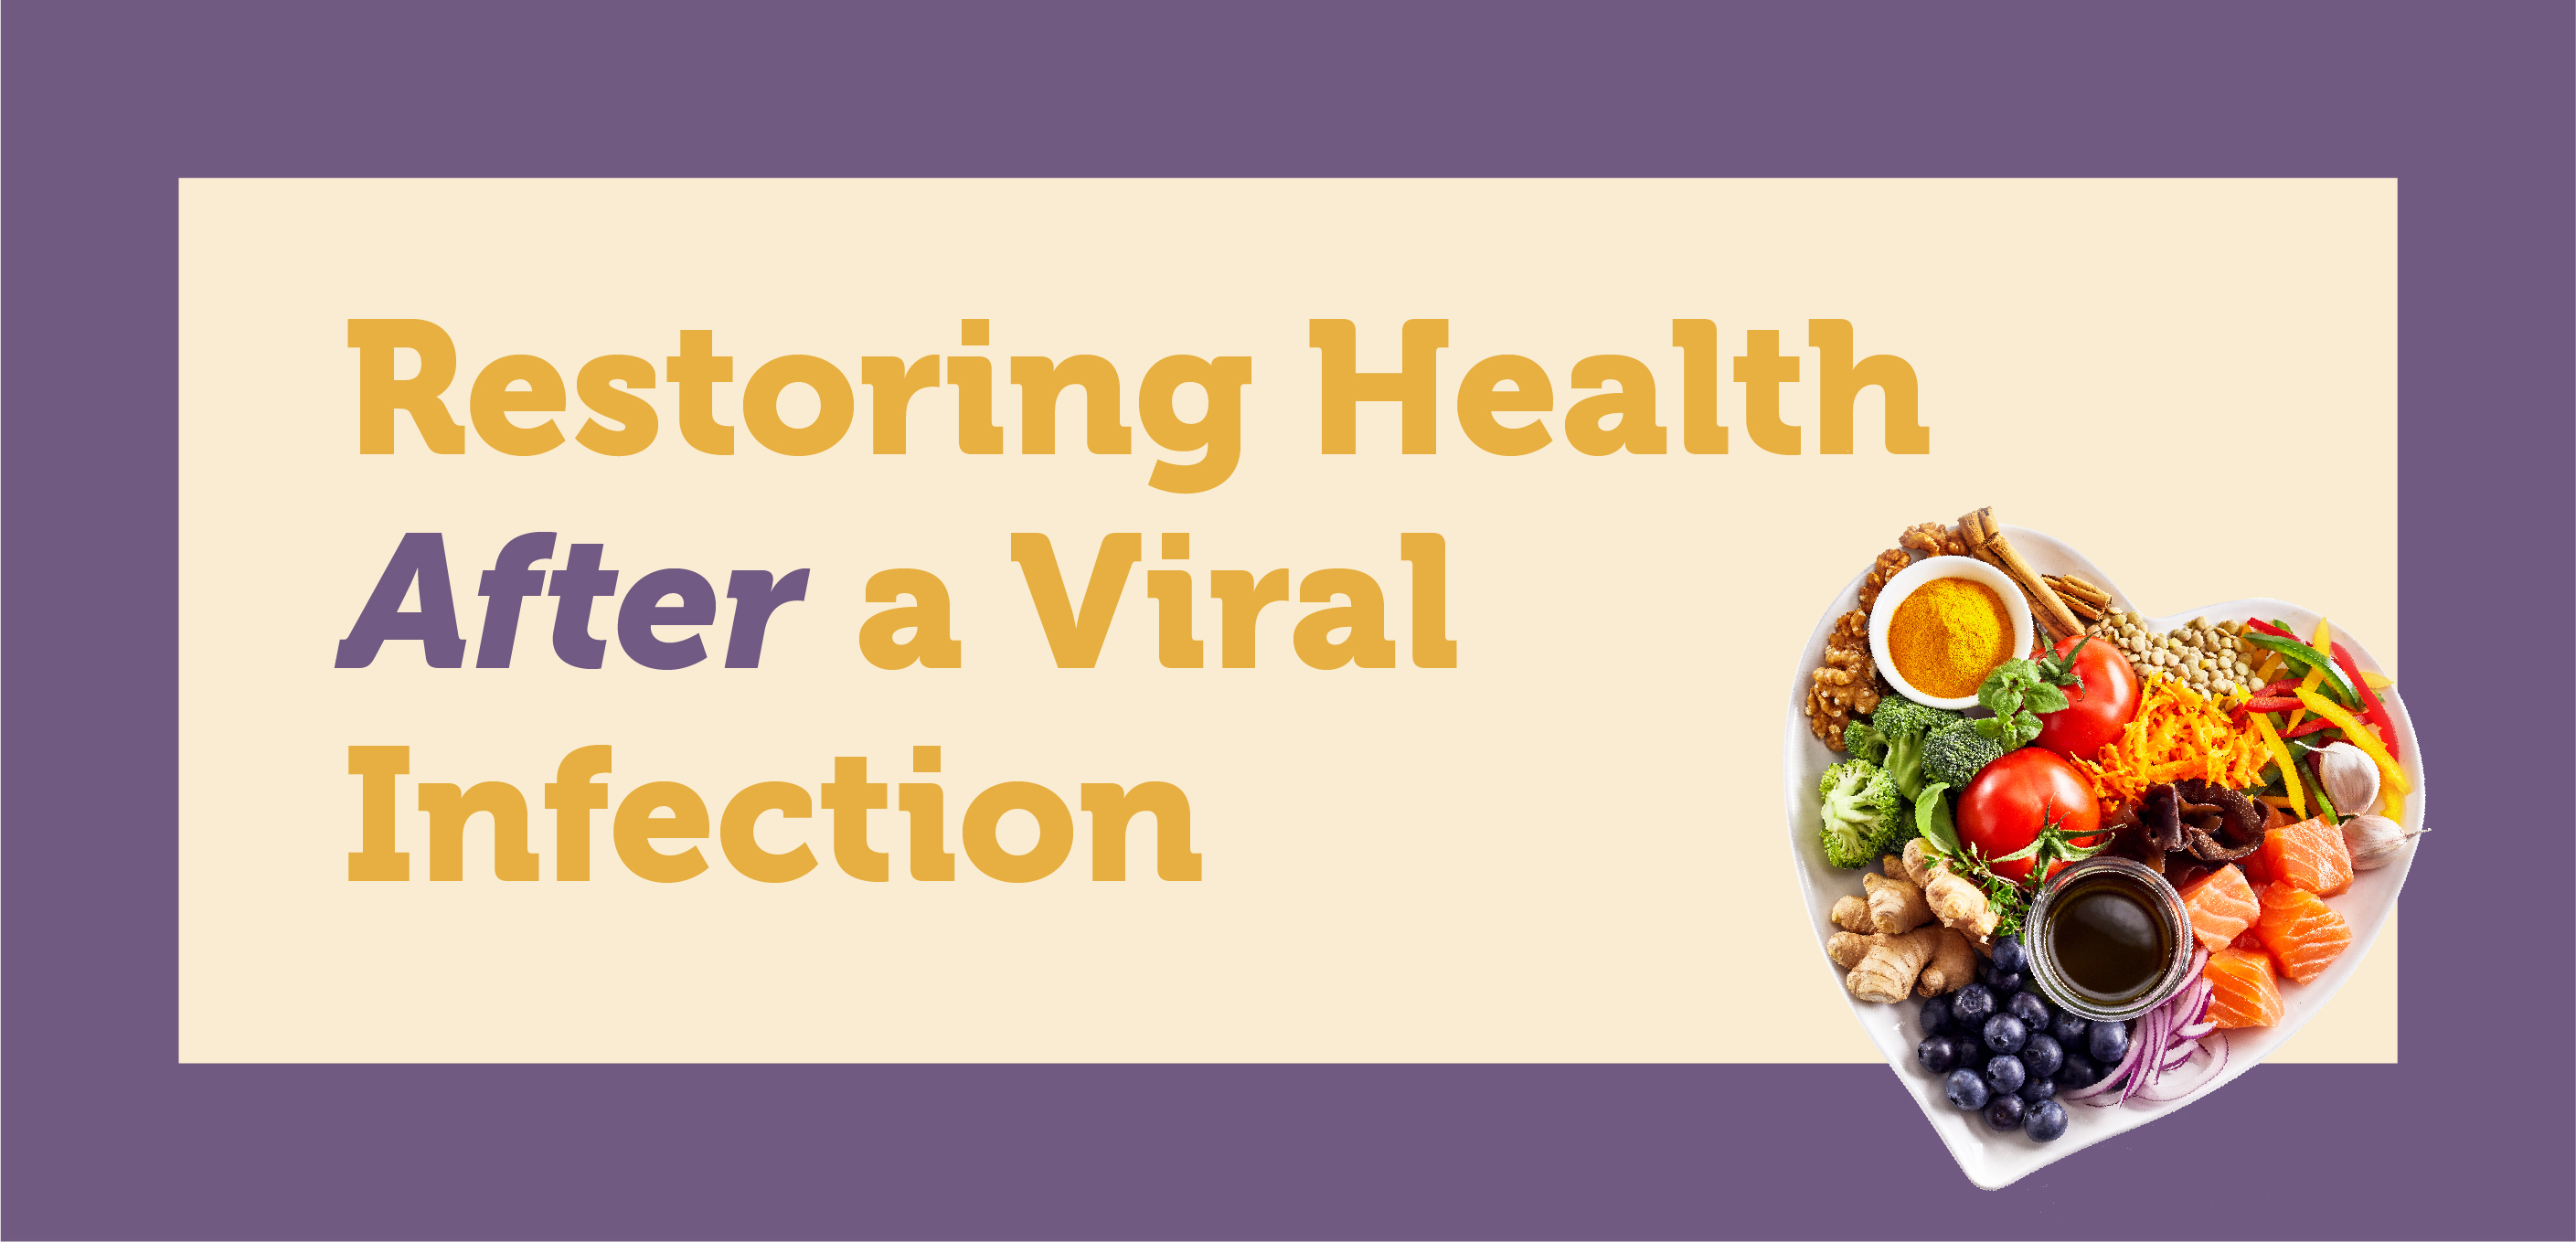 Restoring Health After a Viral Infection